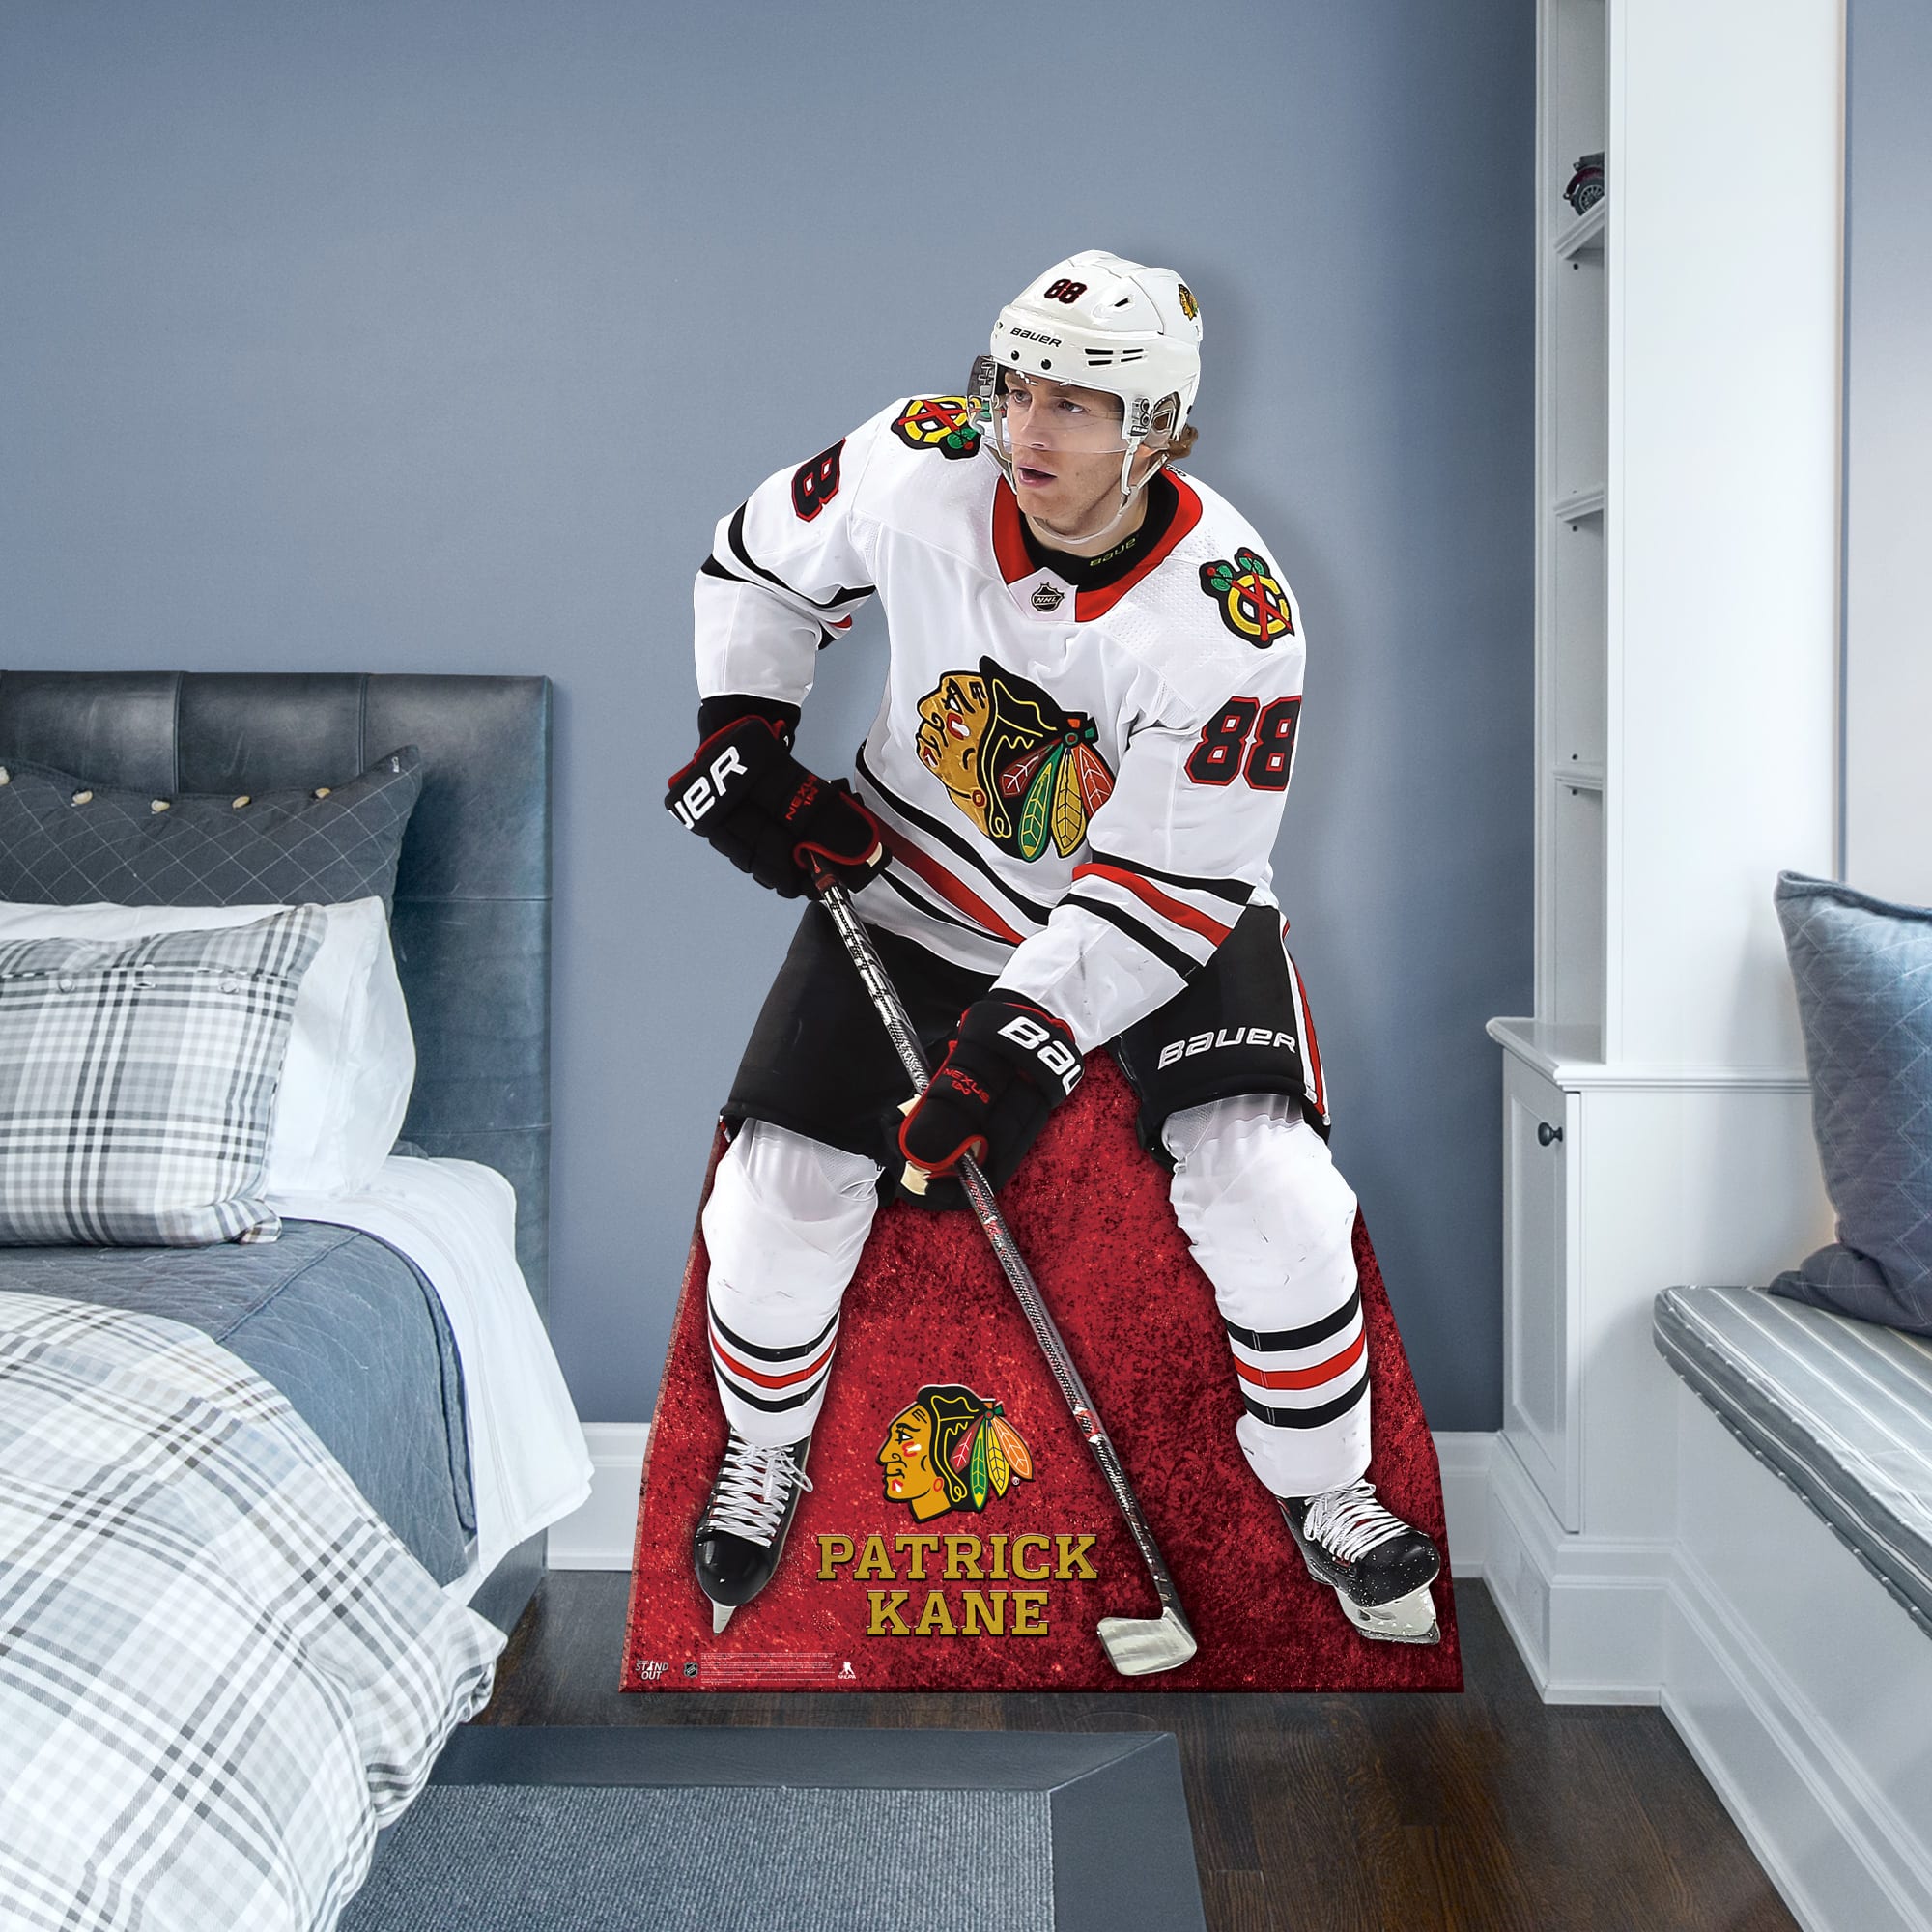 Patrick Kane for Chicago Blackhawks: Stand Out - Officially Licensed NHL Foam Core Standee 45.0"W x 77.0"H by Fathead | Vinyl